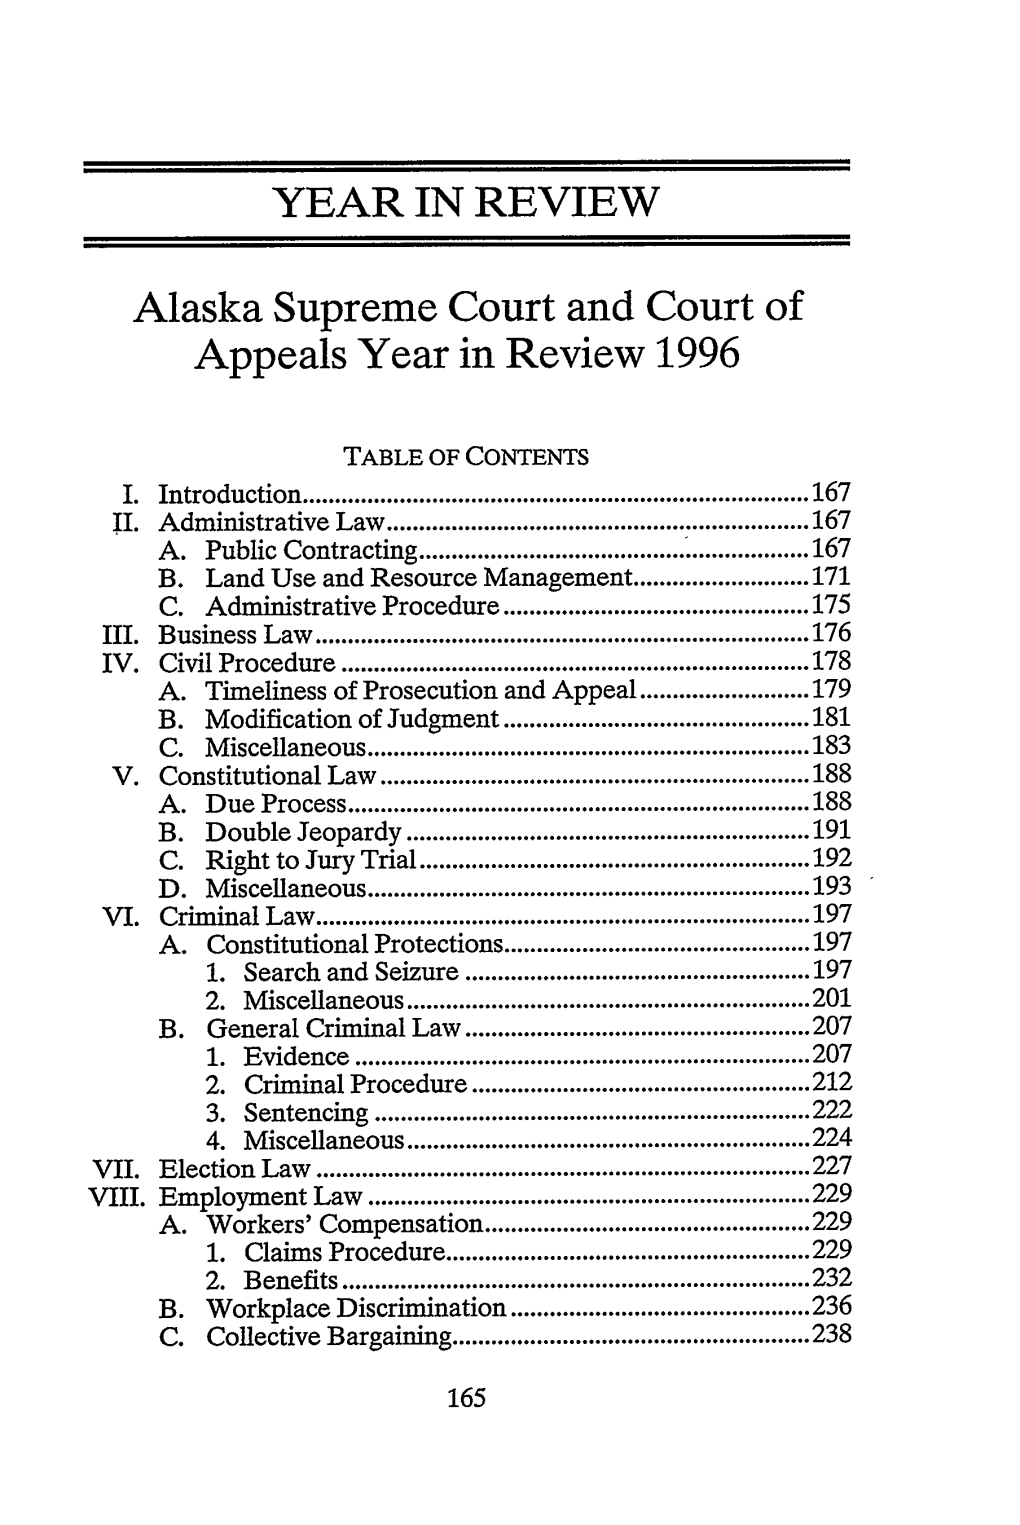 Alaska Supreme Court and Court of Appeals Year in Review 1996